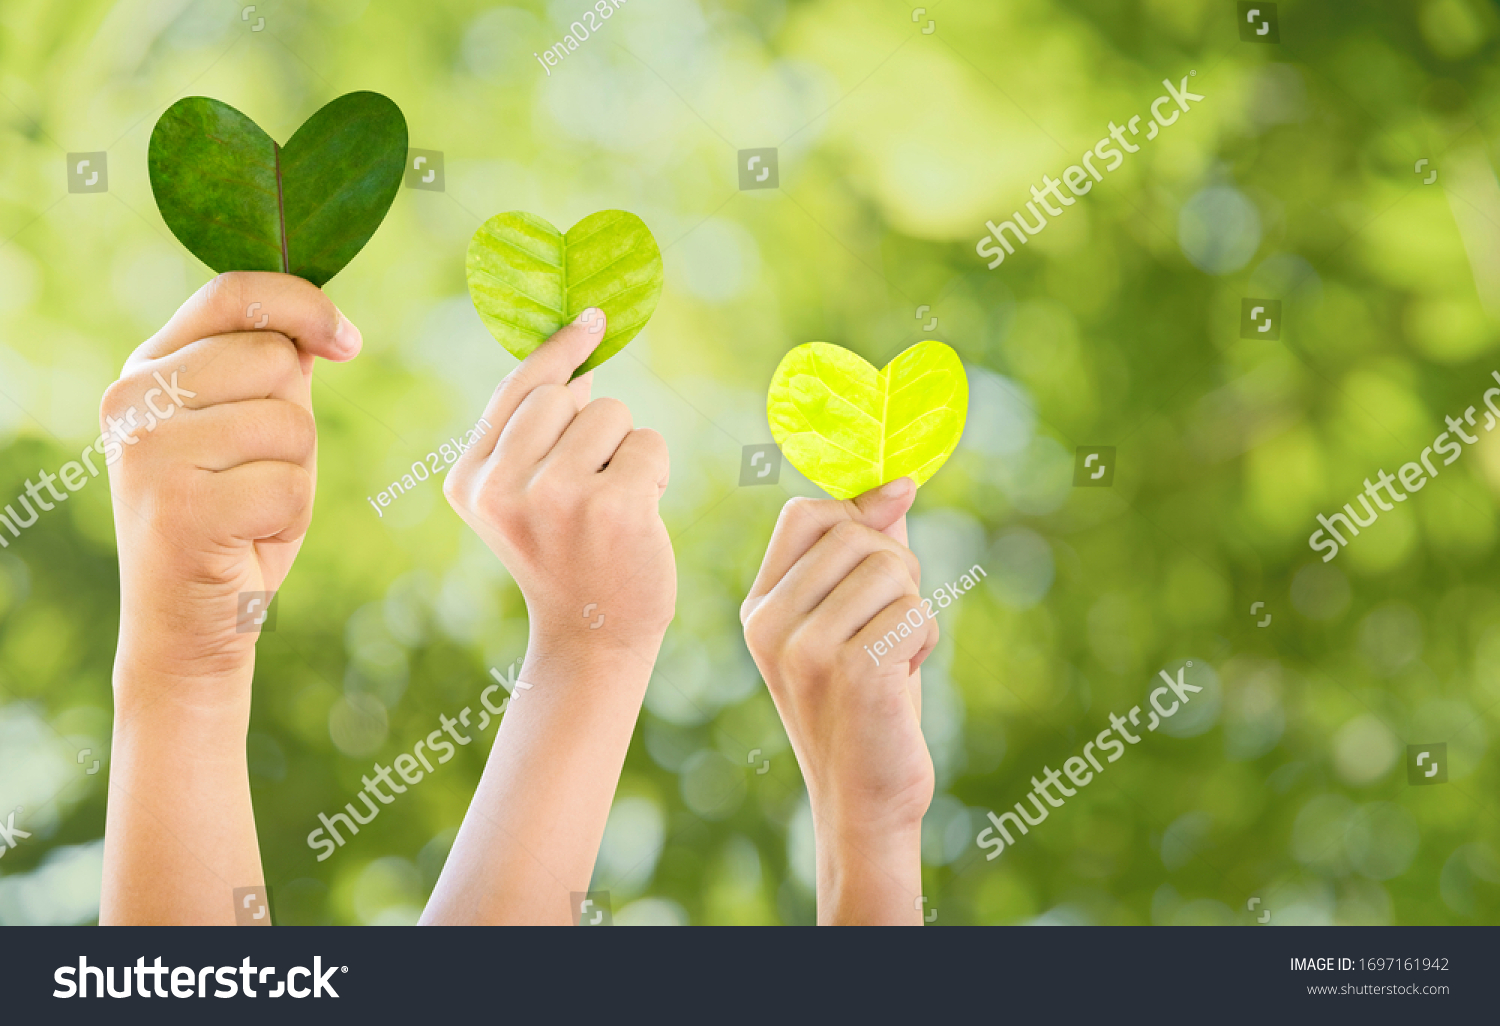 Hands holding green heart shaped tree, planting trees, loving the environment, protecting nature Nourishing the plants World Environment Day To help the world look beautiful, Forest conservation conce #1697161942